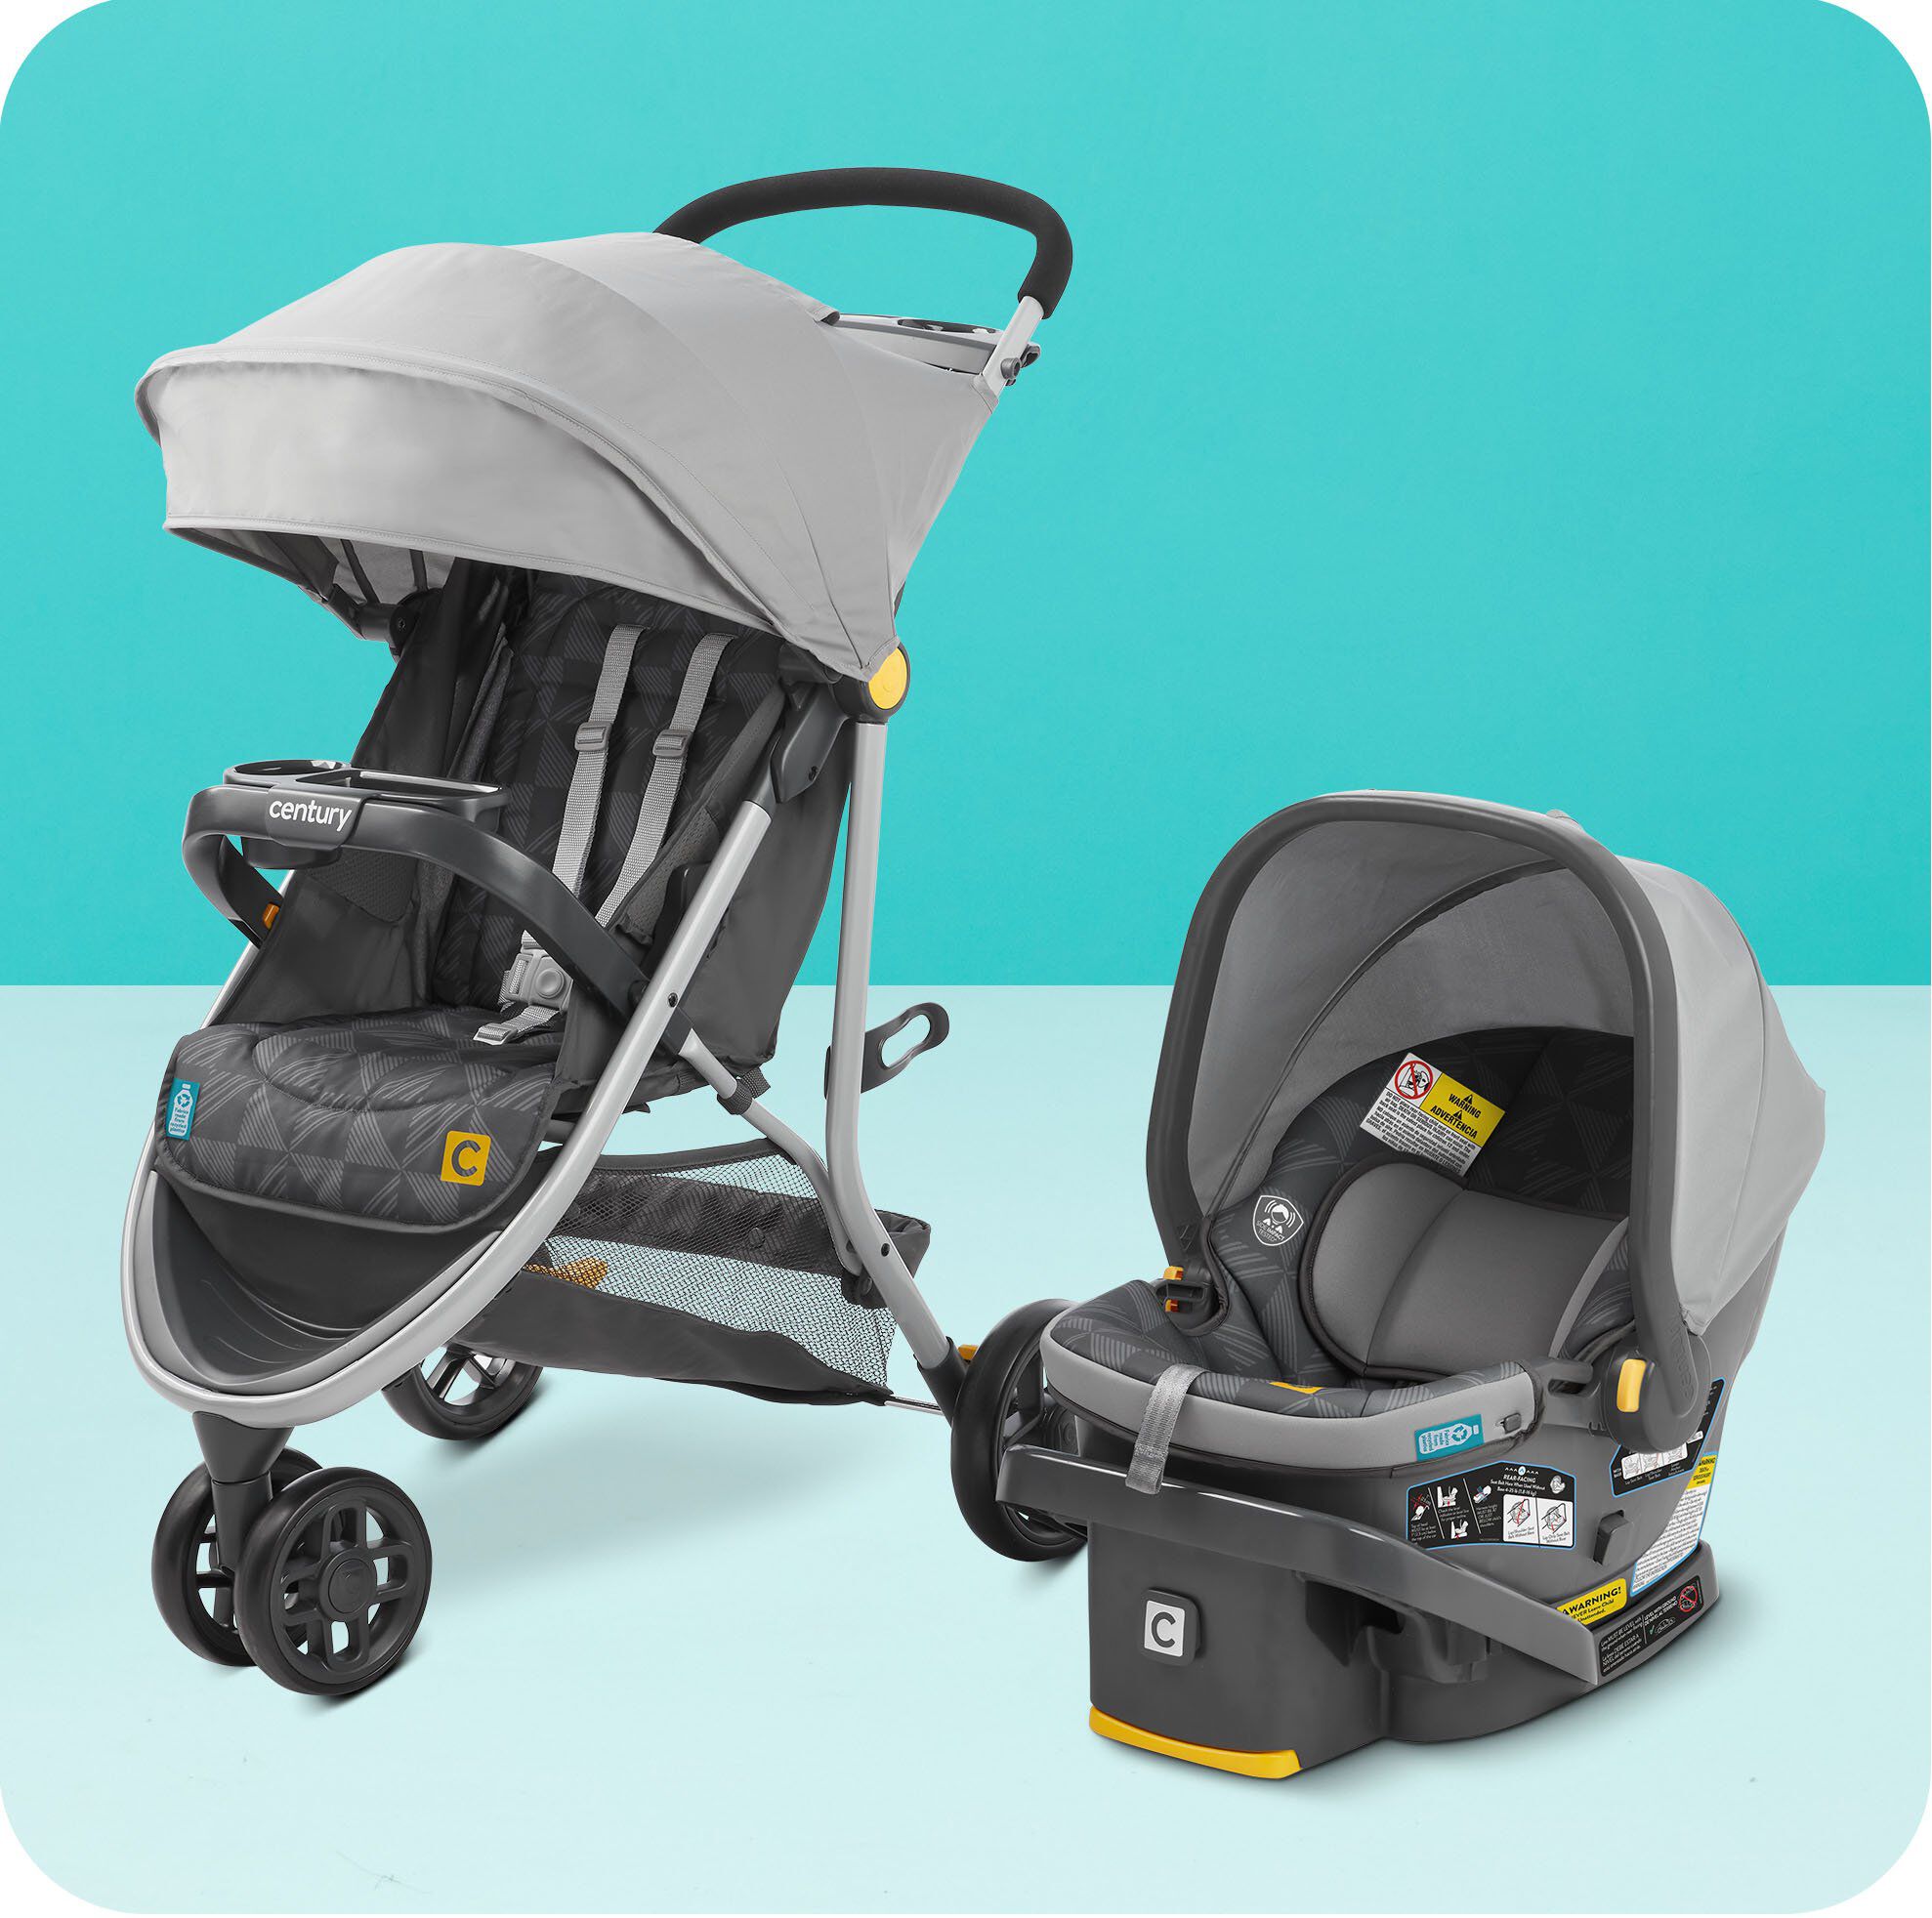 expandable travel system stroller